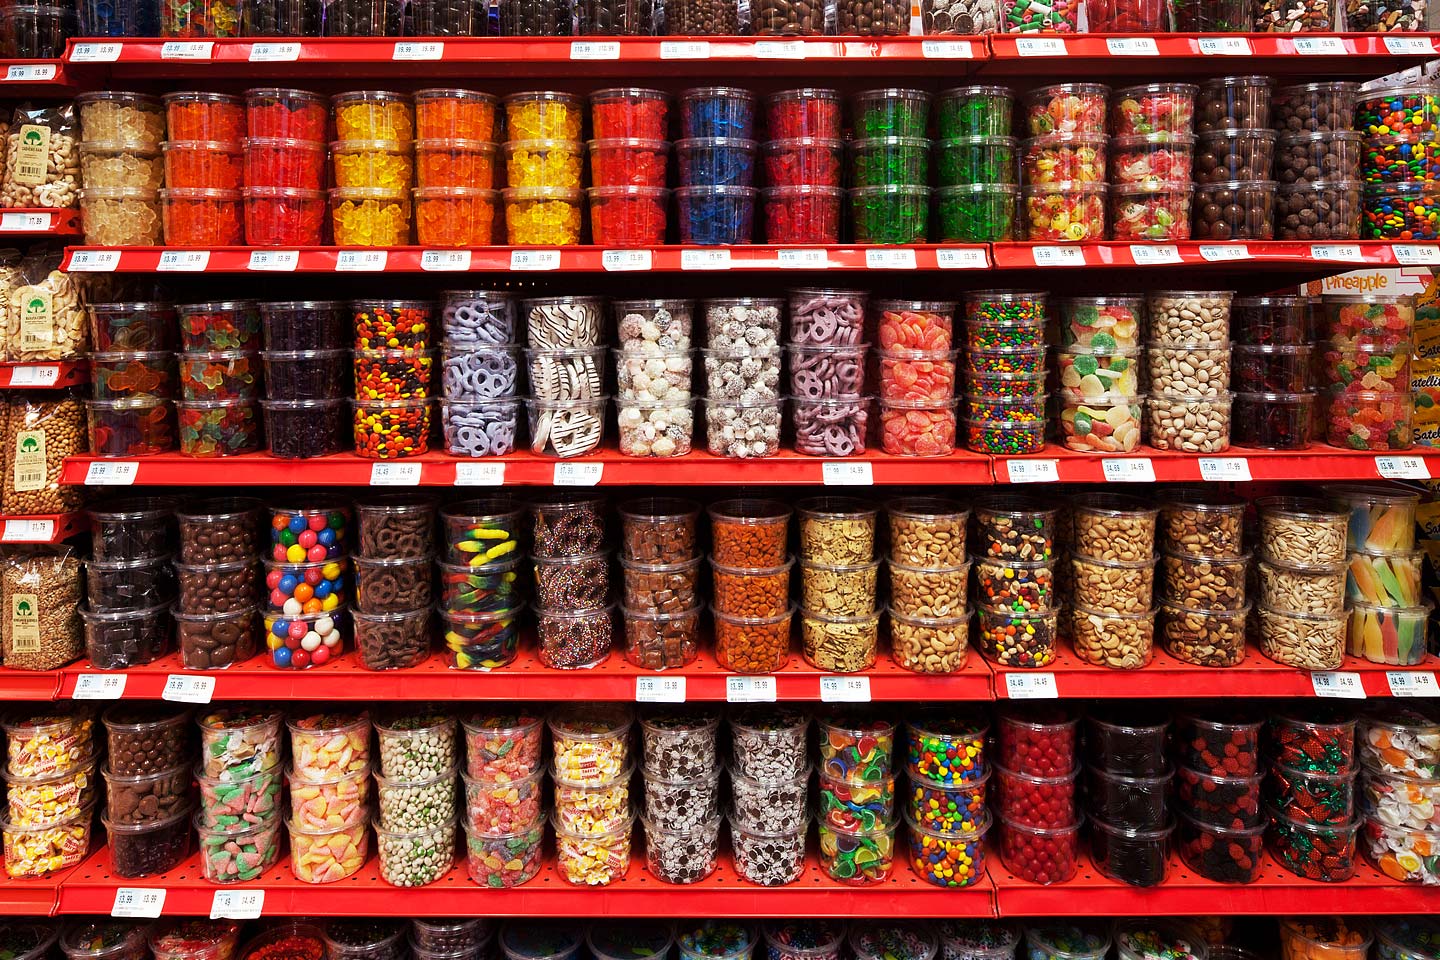 shelves upon colorful shelves of bulk candy and nuts for sale at antons fruit ranch